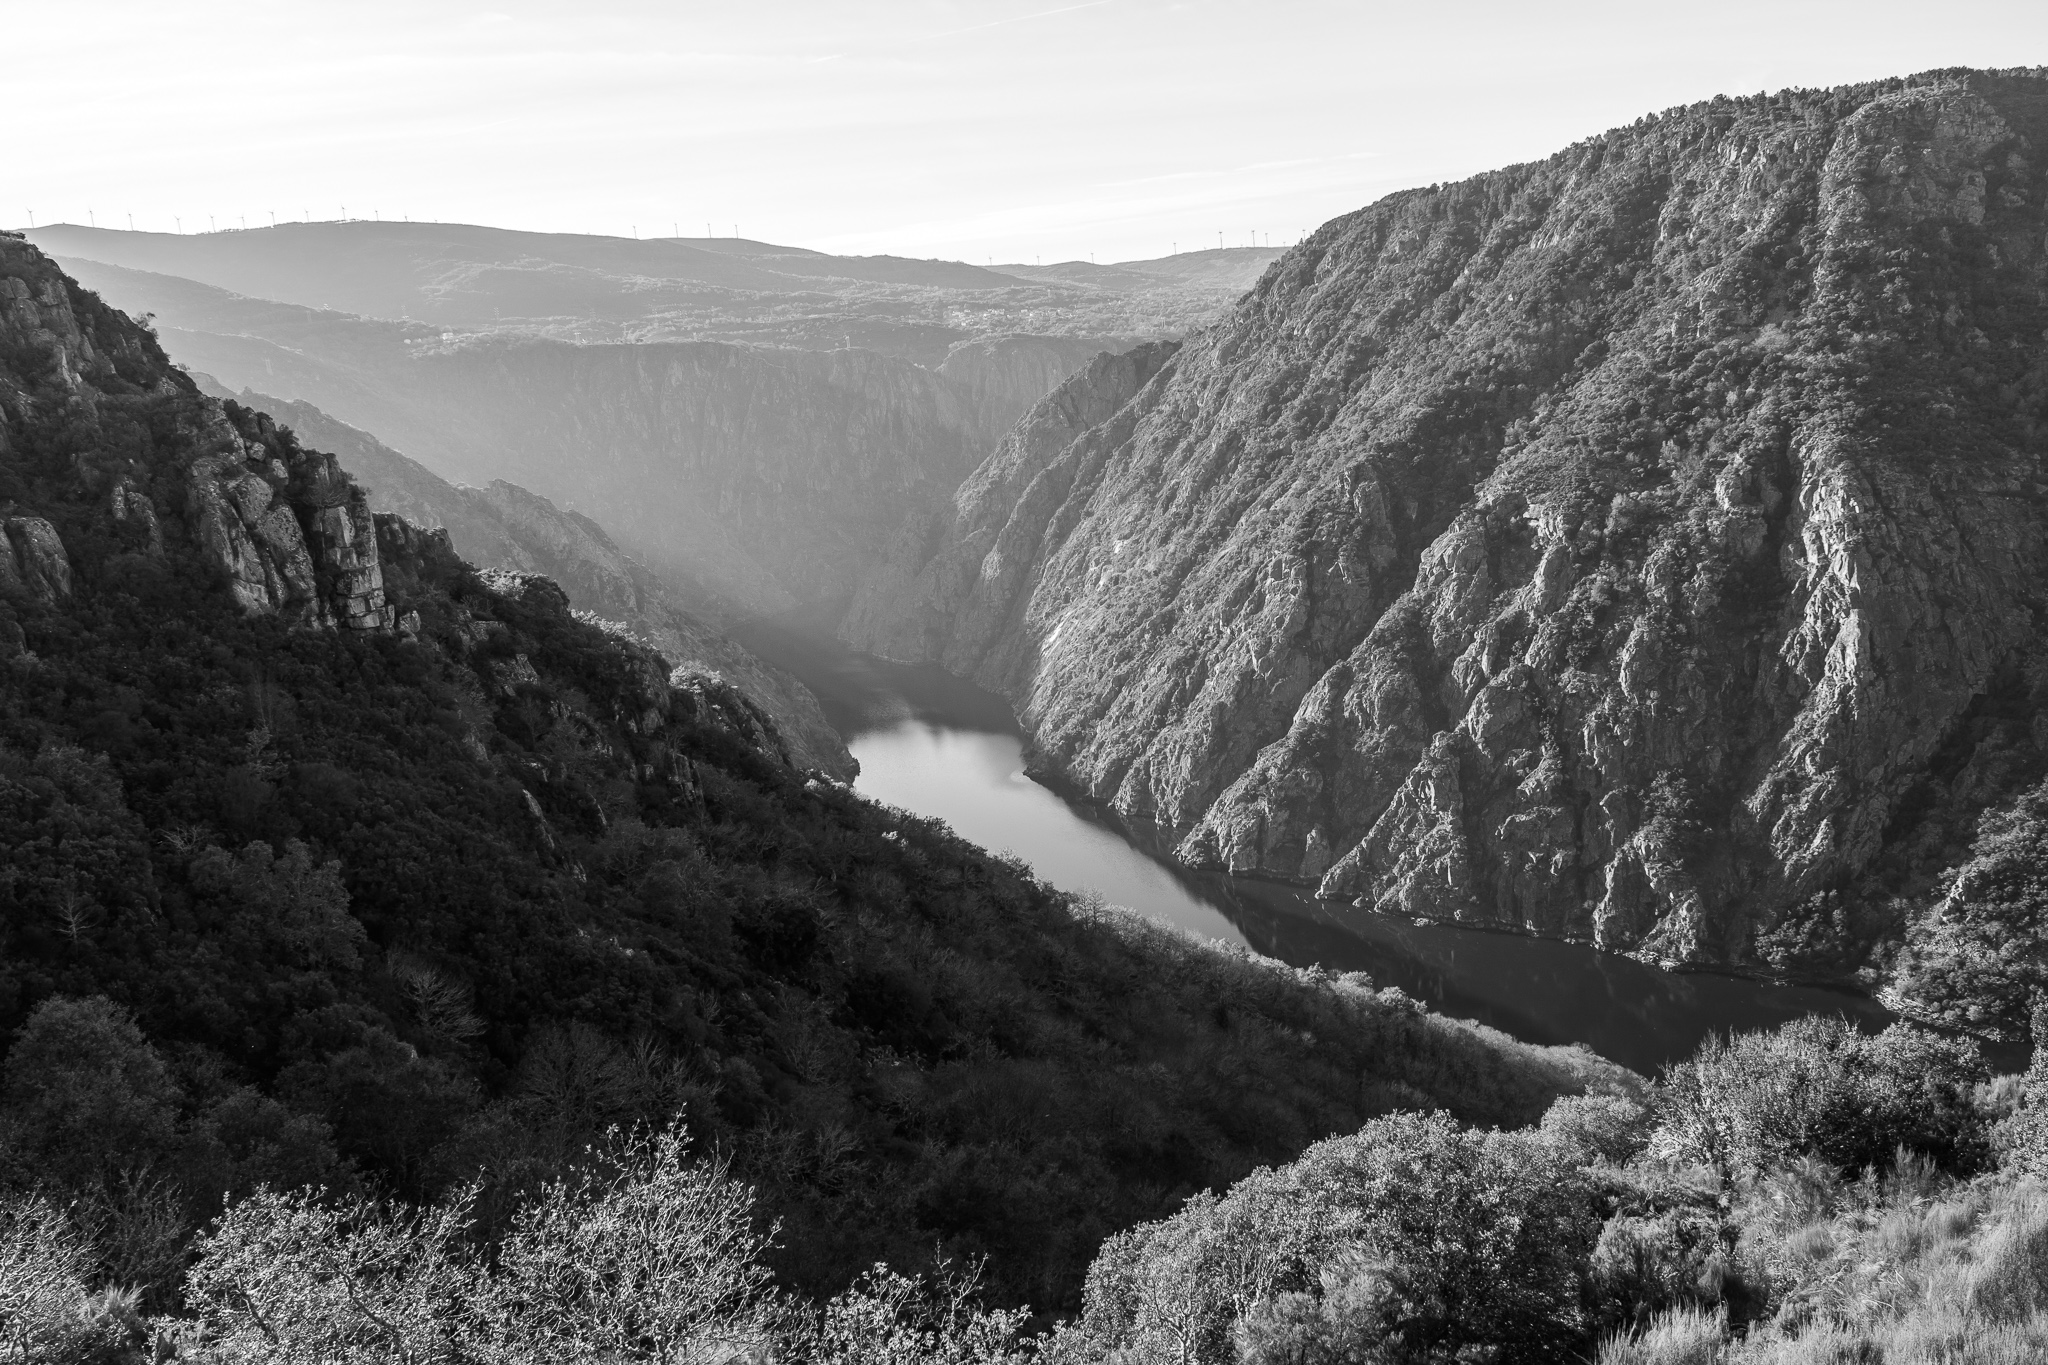 At the encounter of the banks of the rivers Sil and Miño, on the border between the provinces of Lugo and Ourense, are the gorges of the Canyon of the Sil. <br>Natural spaces with 500m deep canyons, small vineyards and different churches and monasteries make up much of the Ribeira Sacra.